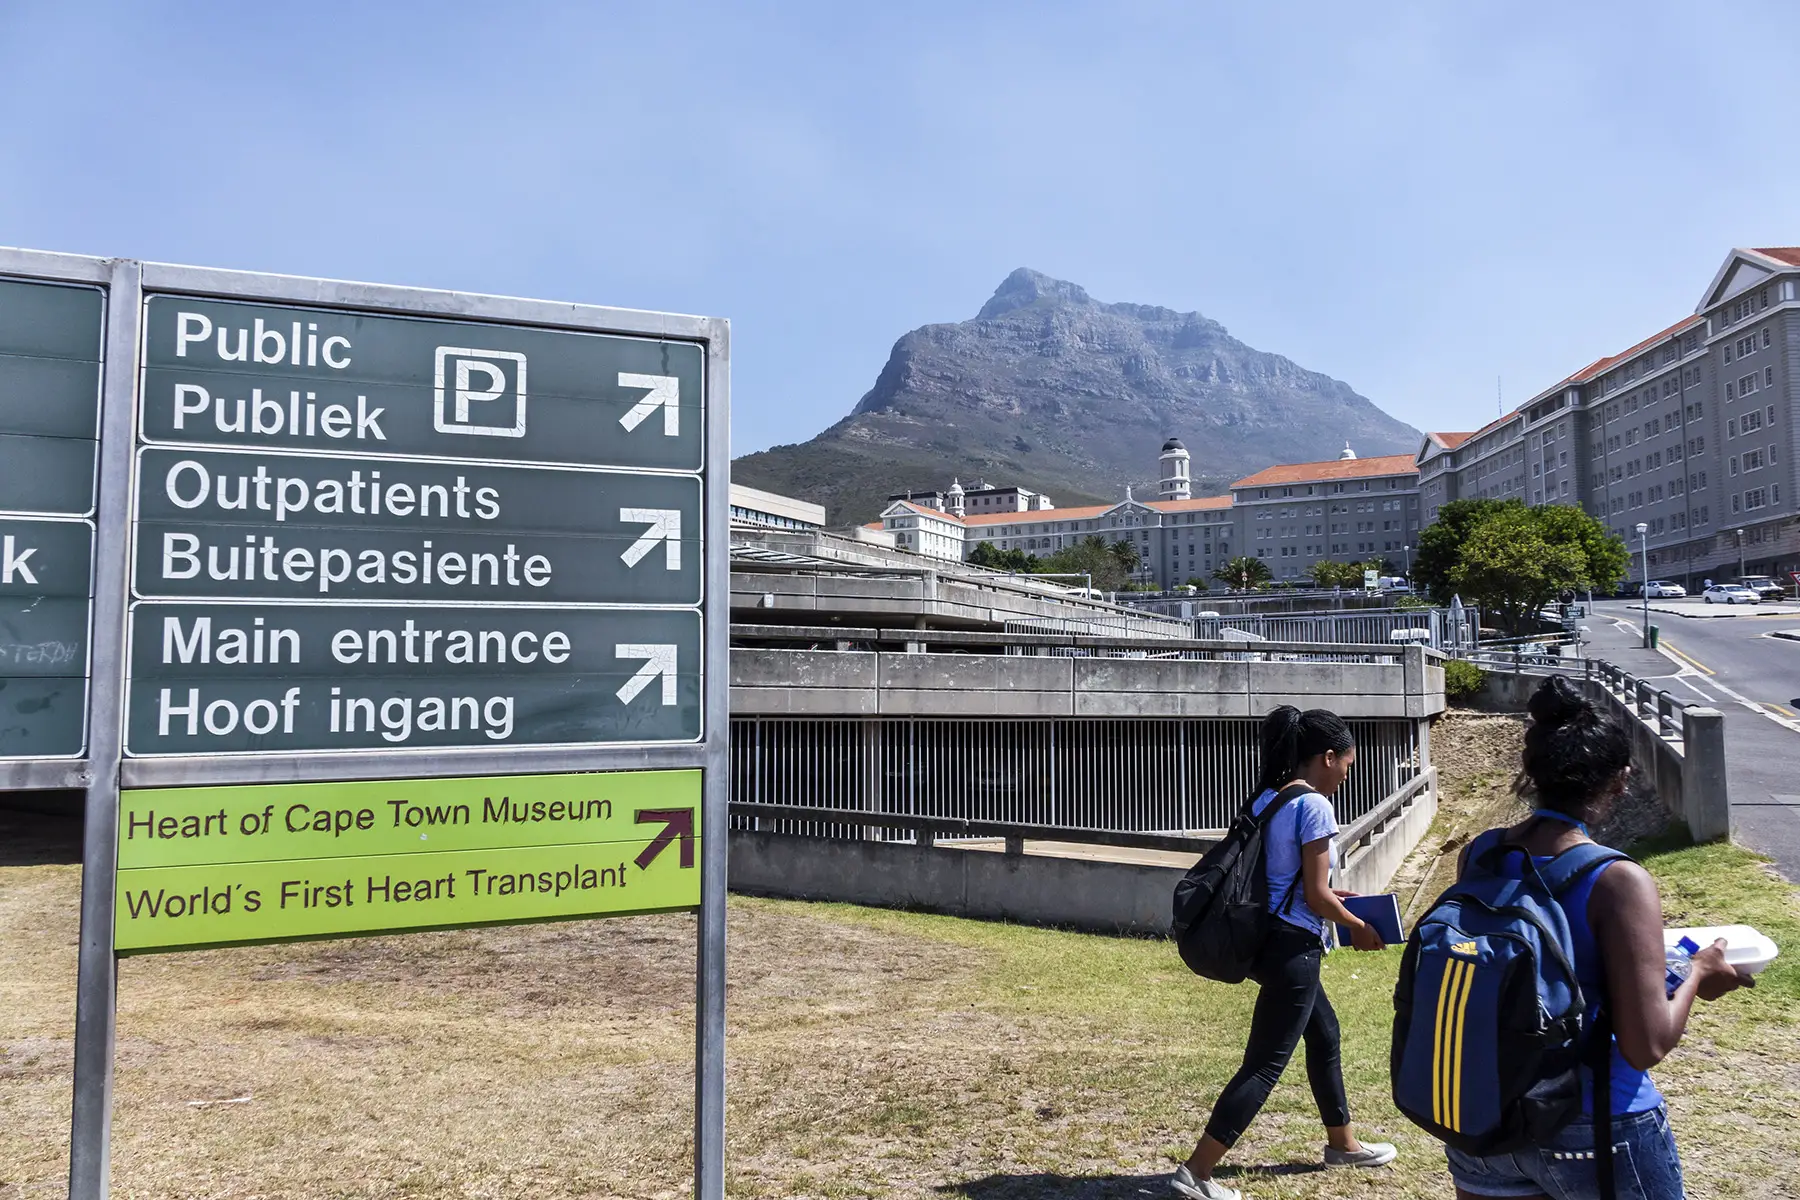 Entrance to the Groote Schuur Hospital in Cape Town, South Africa